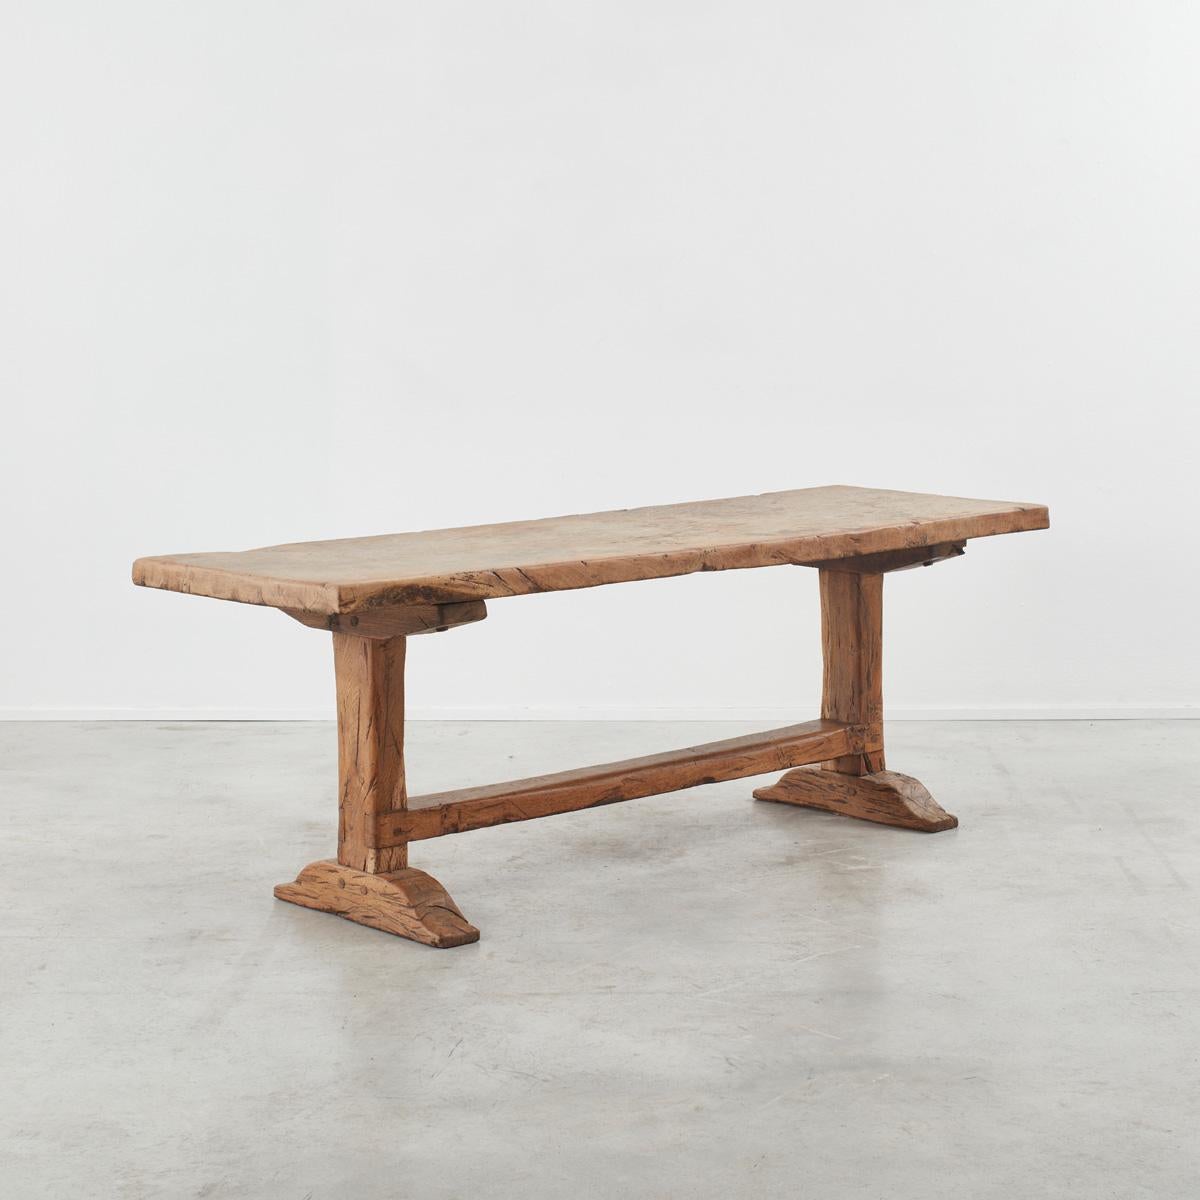 Thick slab-topped monastery table from the Auvergne region of France. Lovely natural dry and gnarled finish with heavily patinated surface due to years of near constant use. Been through various sympathetic restorations over the centuries with parts